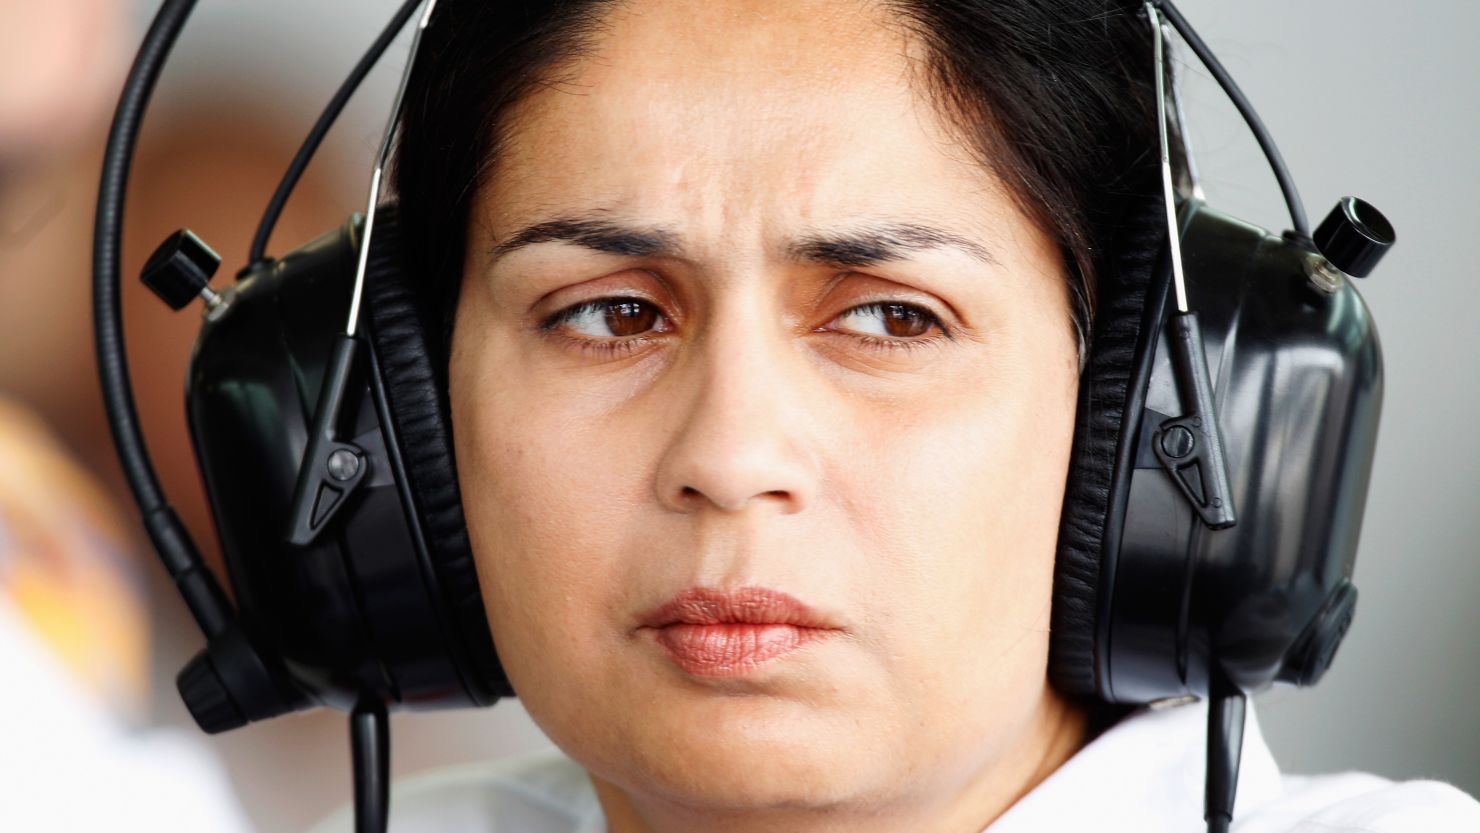 Sauber CEO Monisha Kaltenborn would welcome a budget cap to help small teams to compete with "the big four."